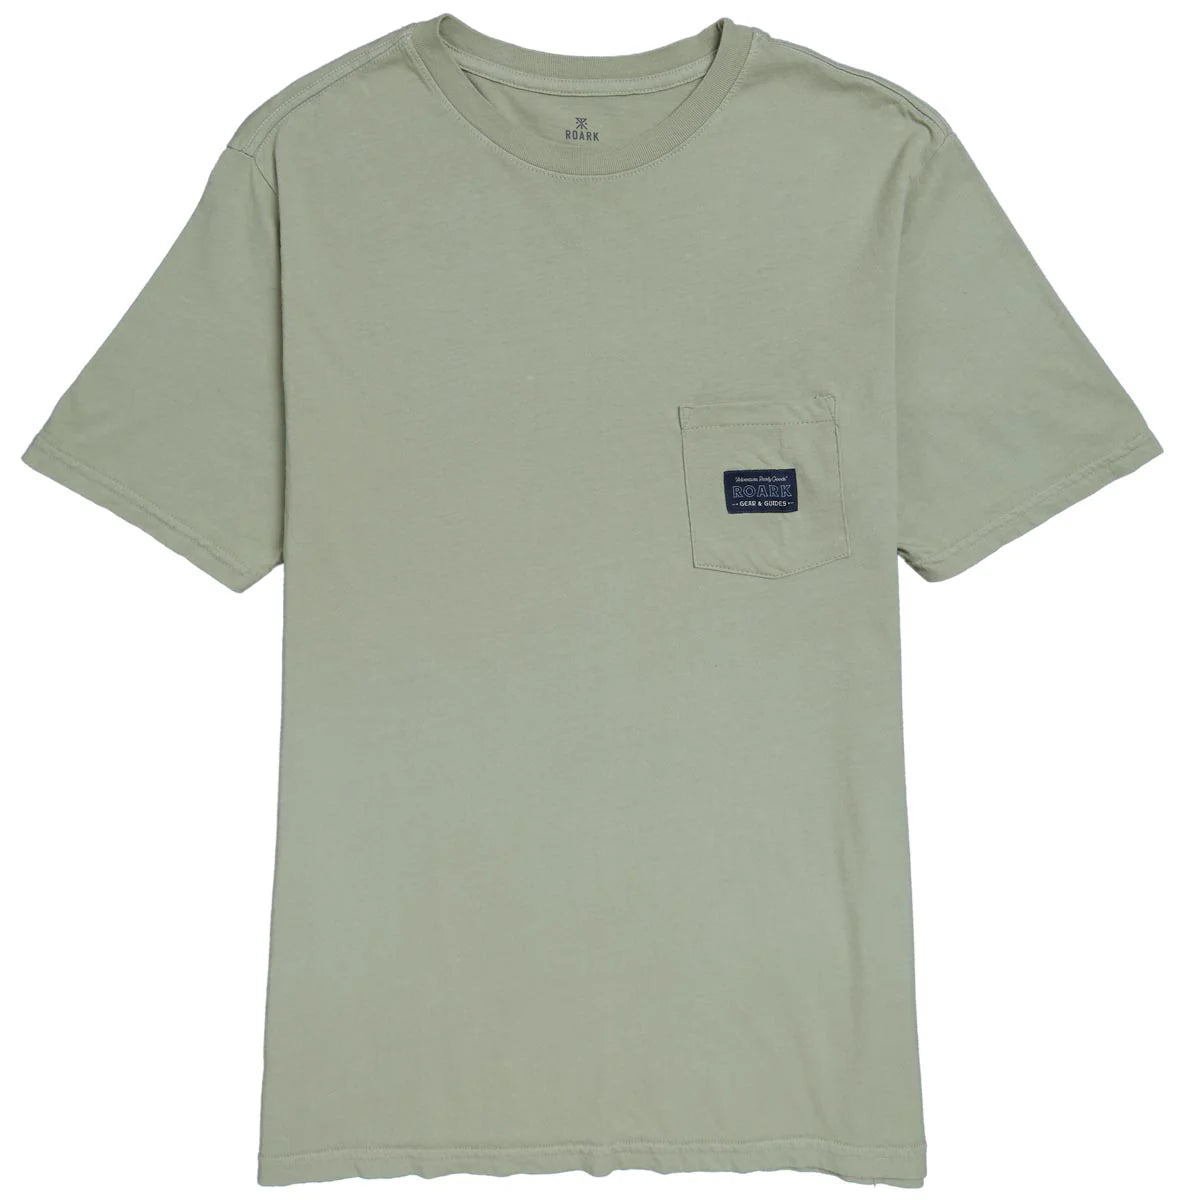 Roark's Label Pocket Tee in the color Chaparral